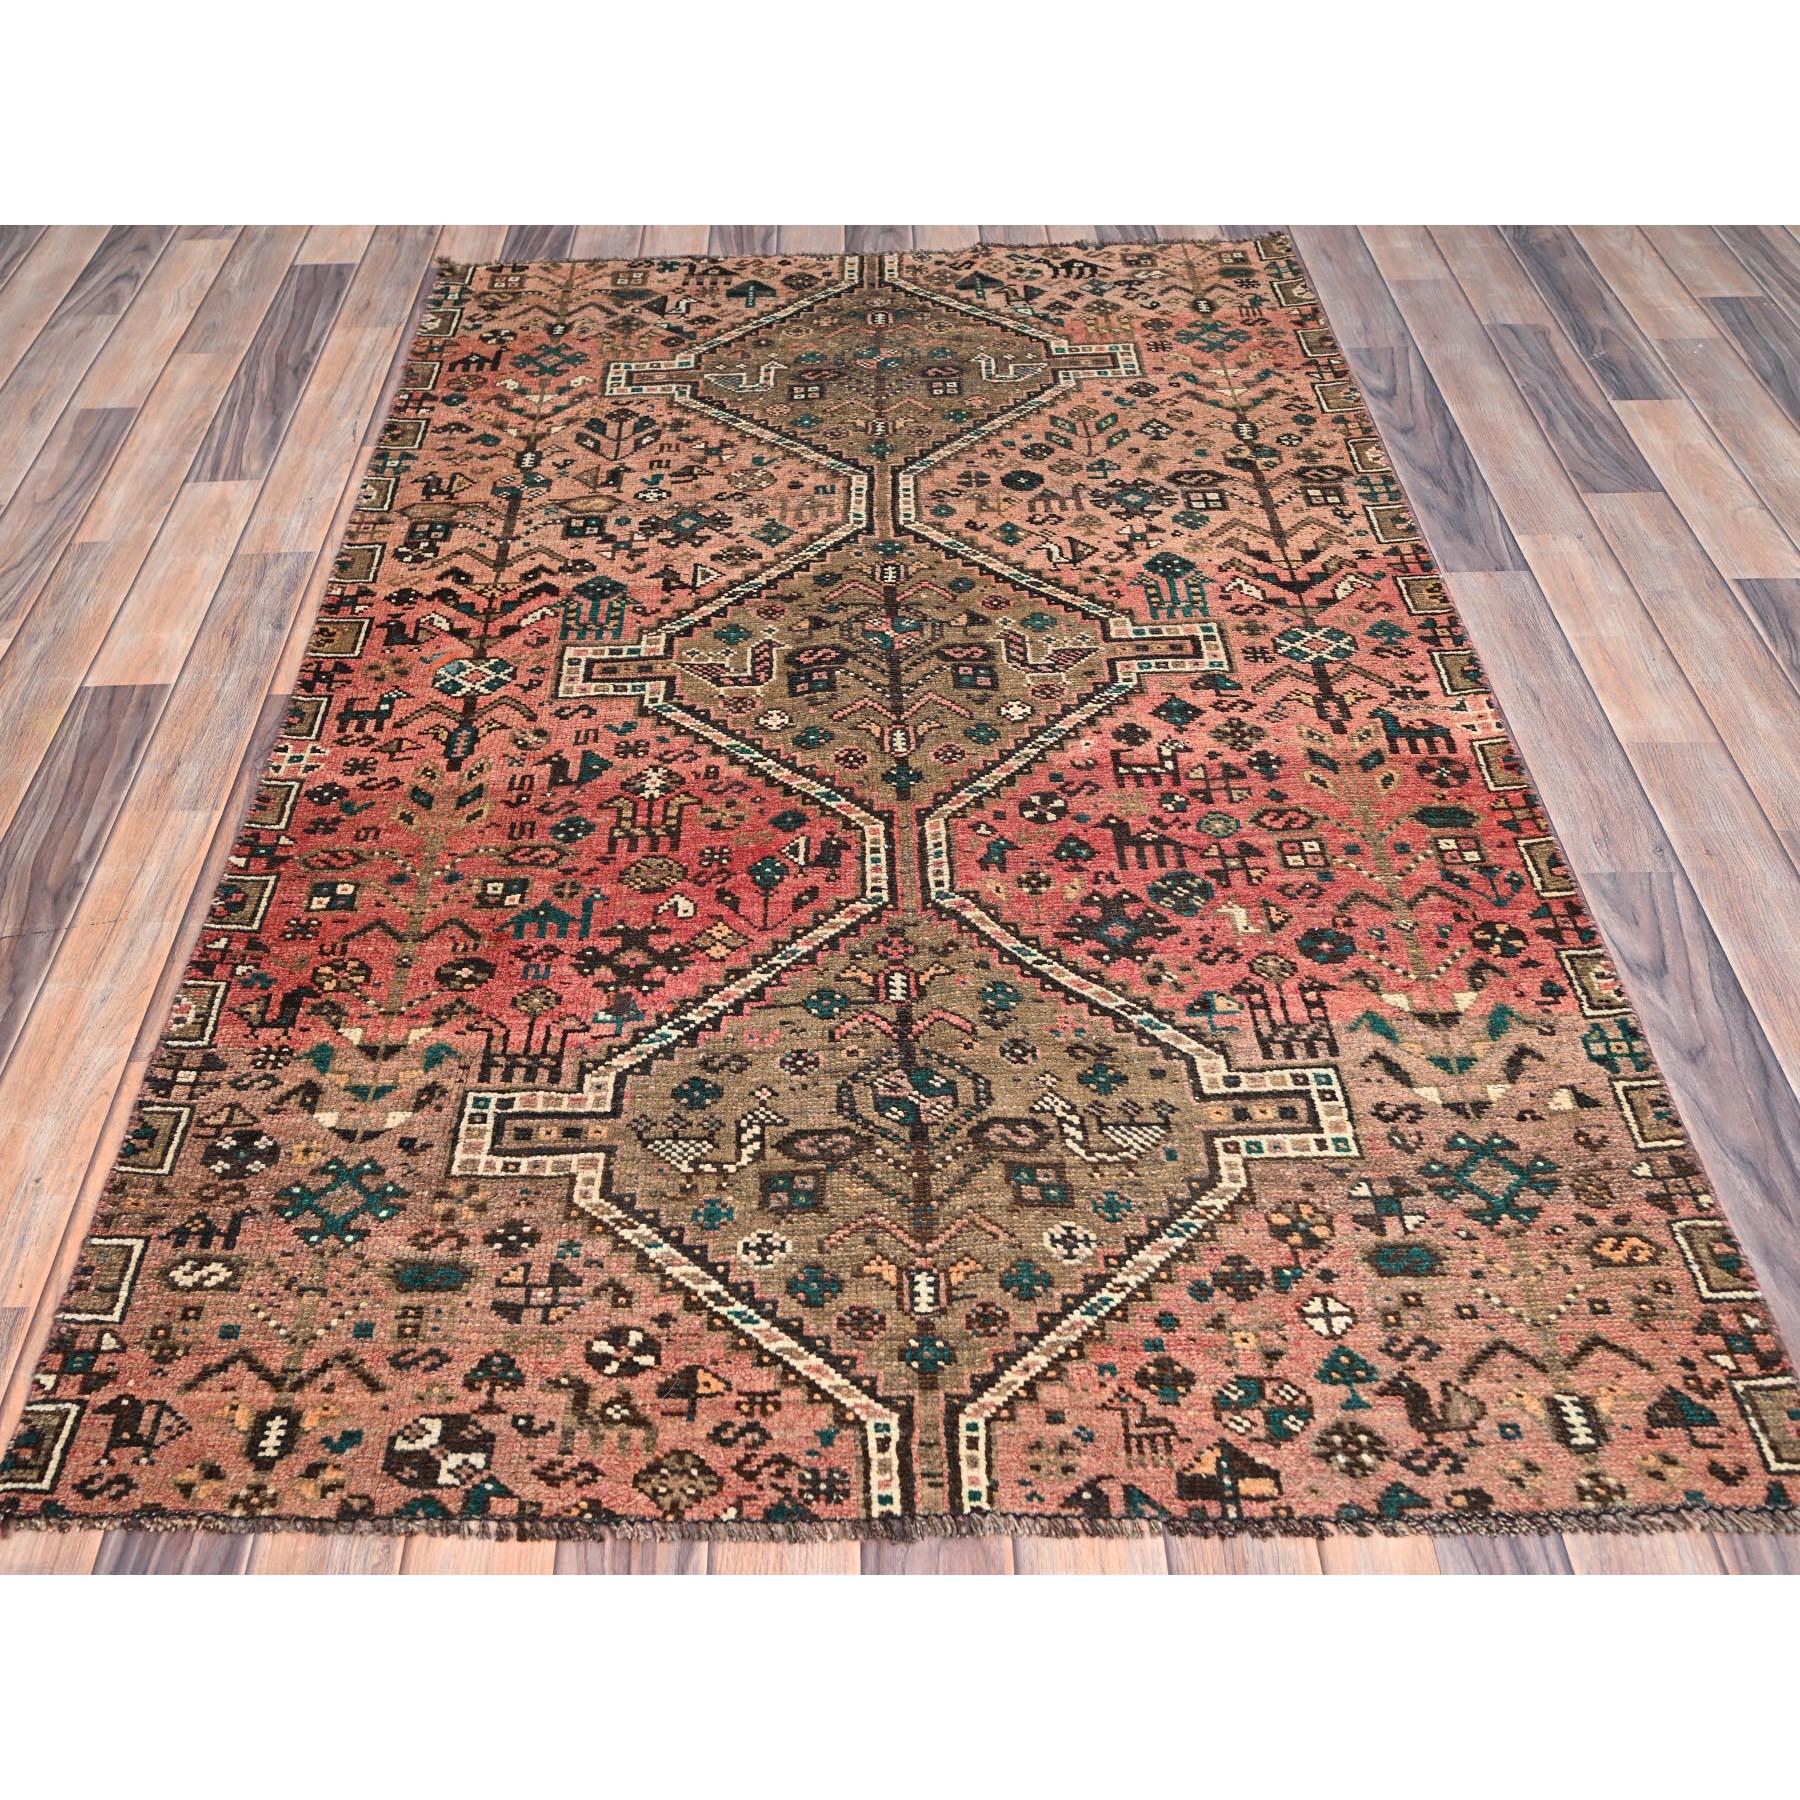 Medieval Acorn Brown Old Persian Shiraz Abrash Evenly Worn Pure Wool Clean Distressed Rug For Sale